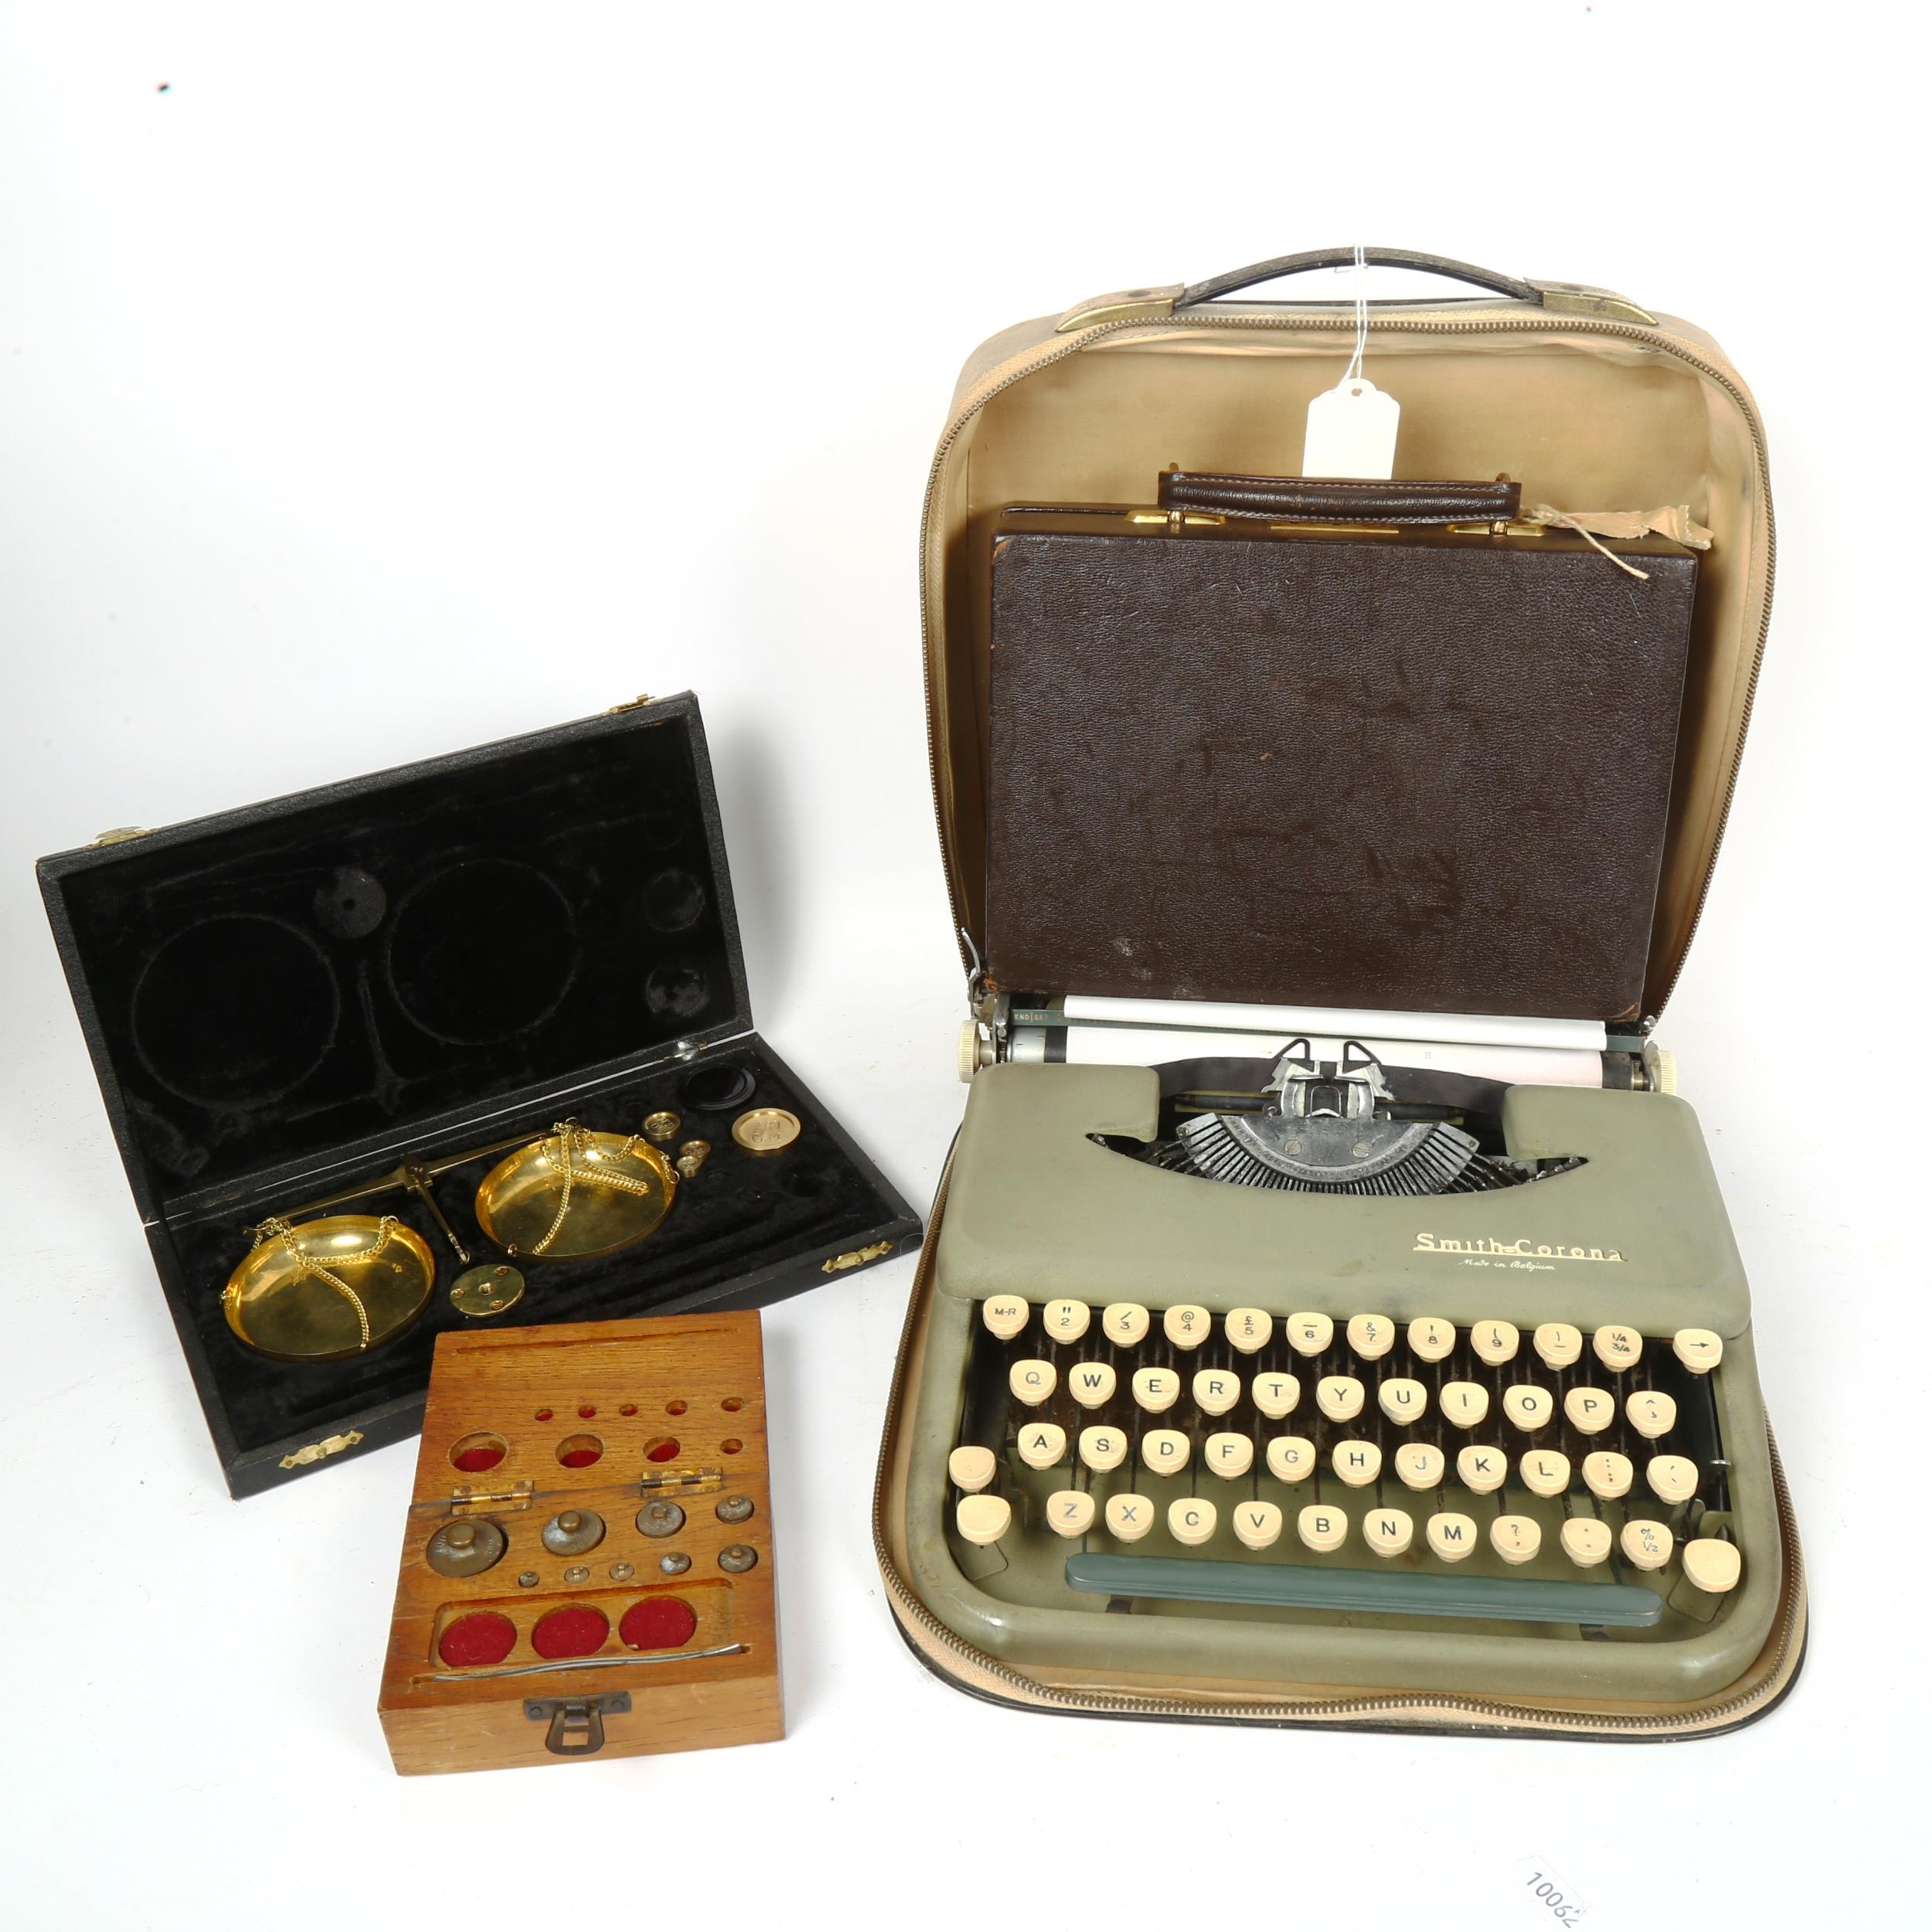 A Smith Corona portable typewriter, 2 scales and weights, and a leather jewel case with tray